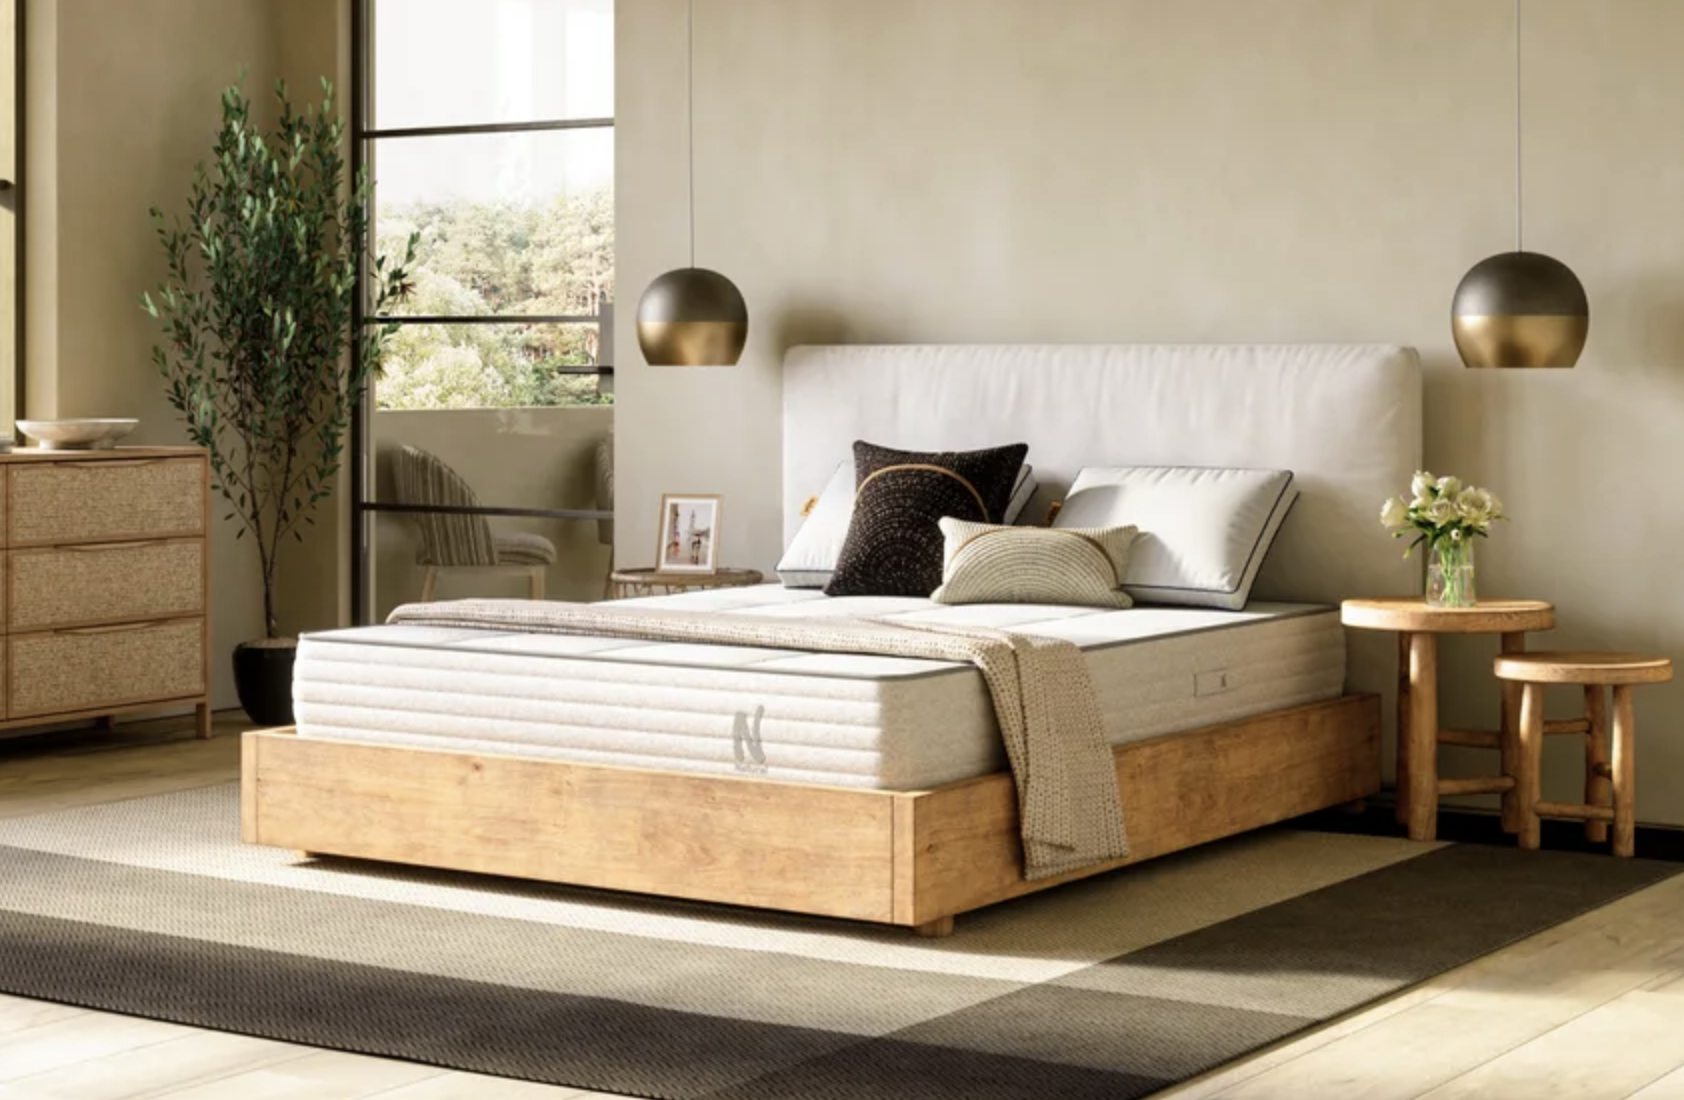 A bare mattress is shown on a bed in a bedroom